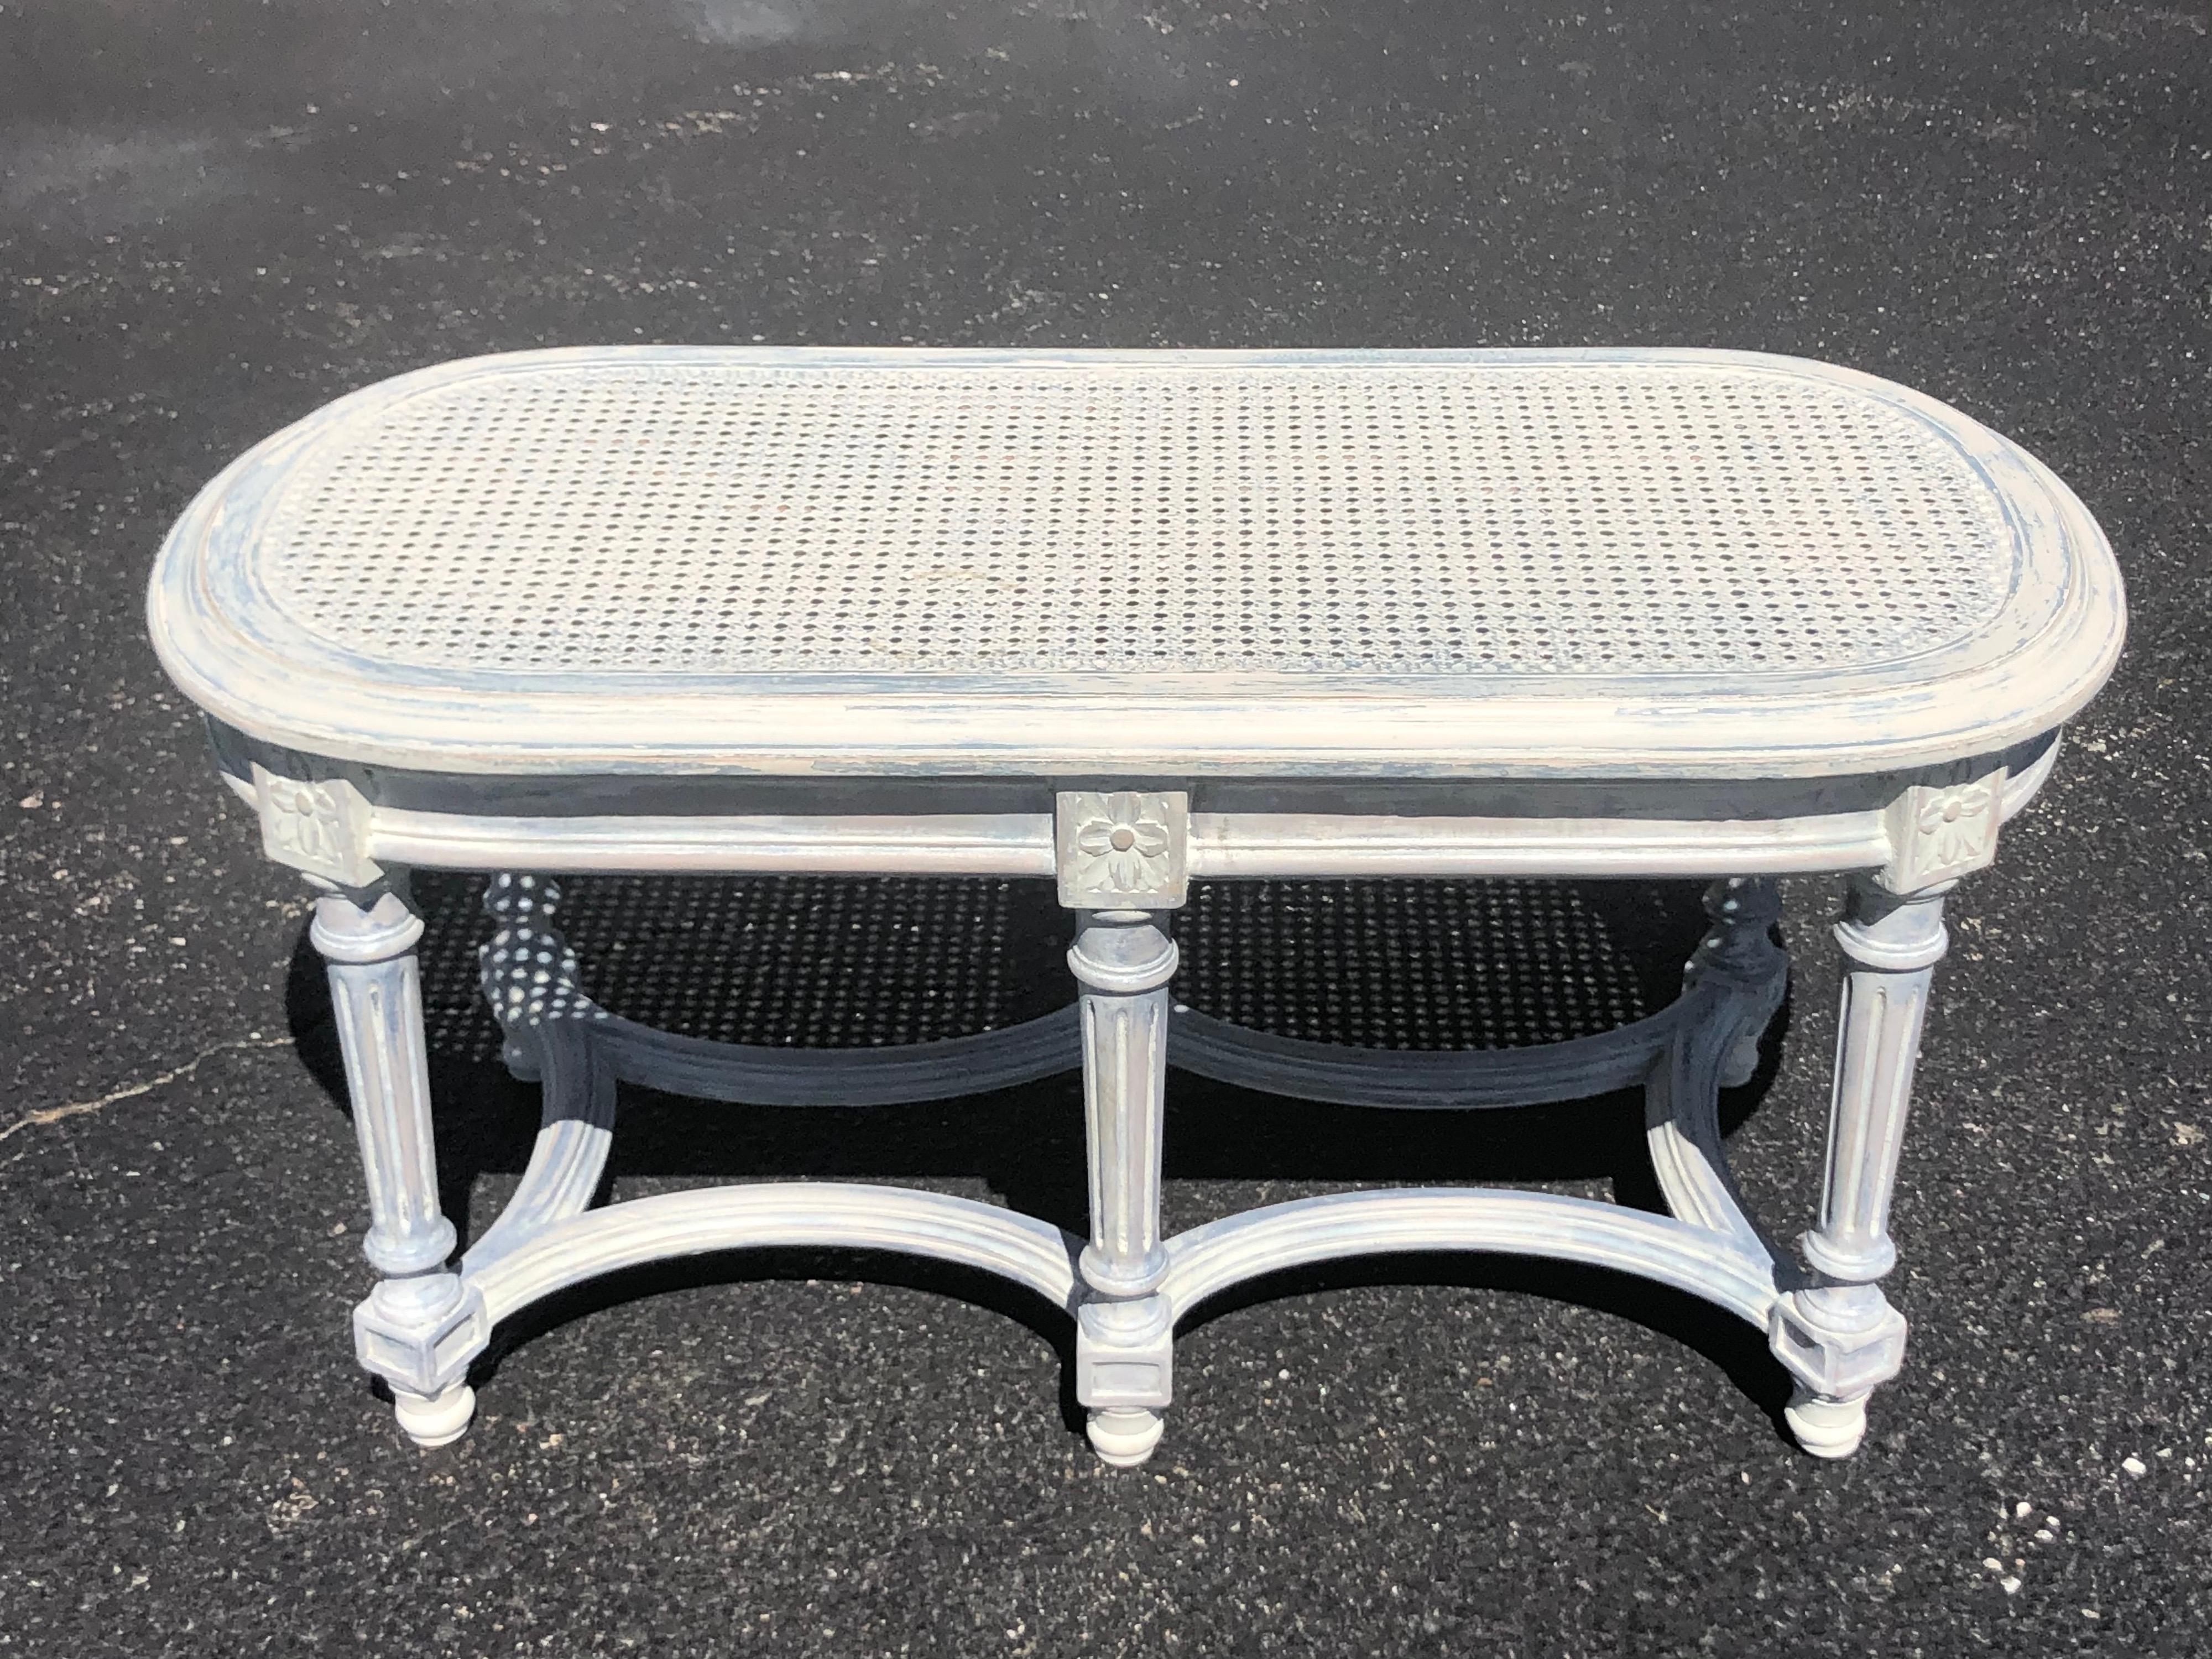 Shabby chic whitewashed cane bench. Perfect accent piece for that bedroom. French provincial in style. Use at the foot of a bed or under a windowsill. Or use as a nice oval coffee table. This item can parcel ship.